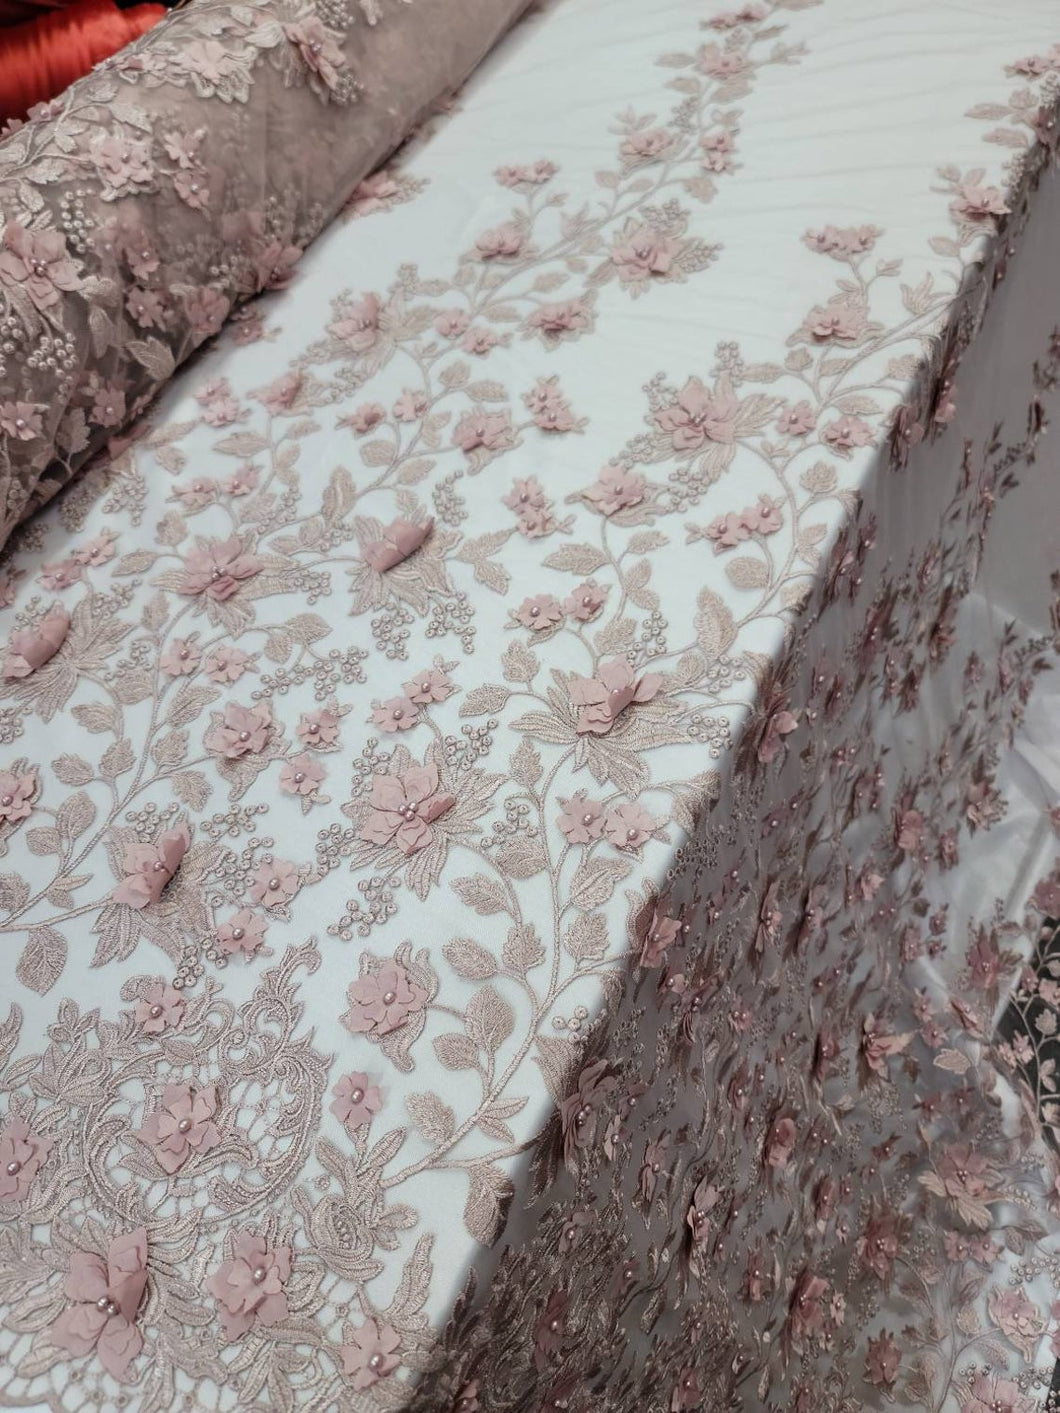 Fabric Sold By The Yard Dusty Rose Beaded Lace 3d Floral Flowers Embroidery On Mesh Bridal Evening Dress Quinceañera Gown Prom Fashion Lace